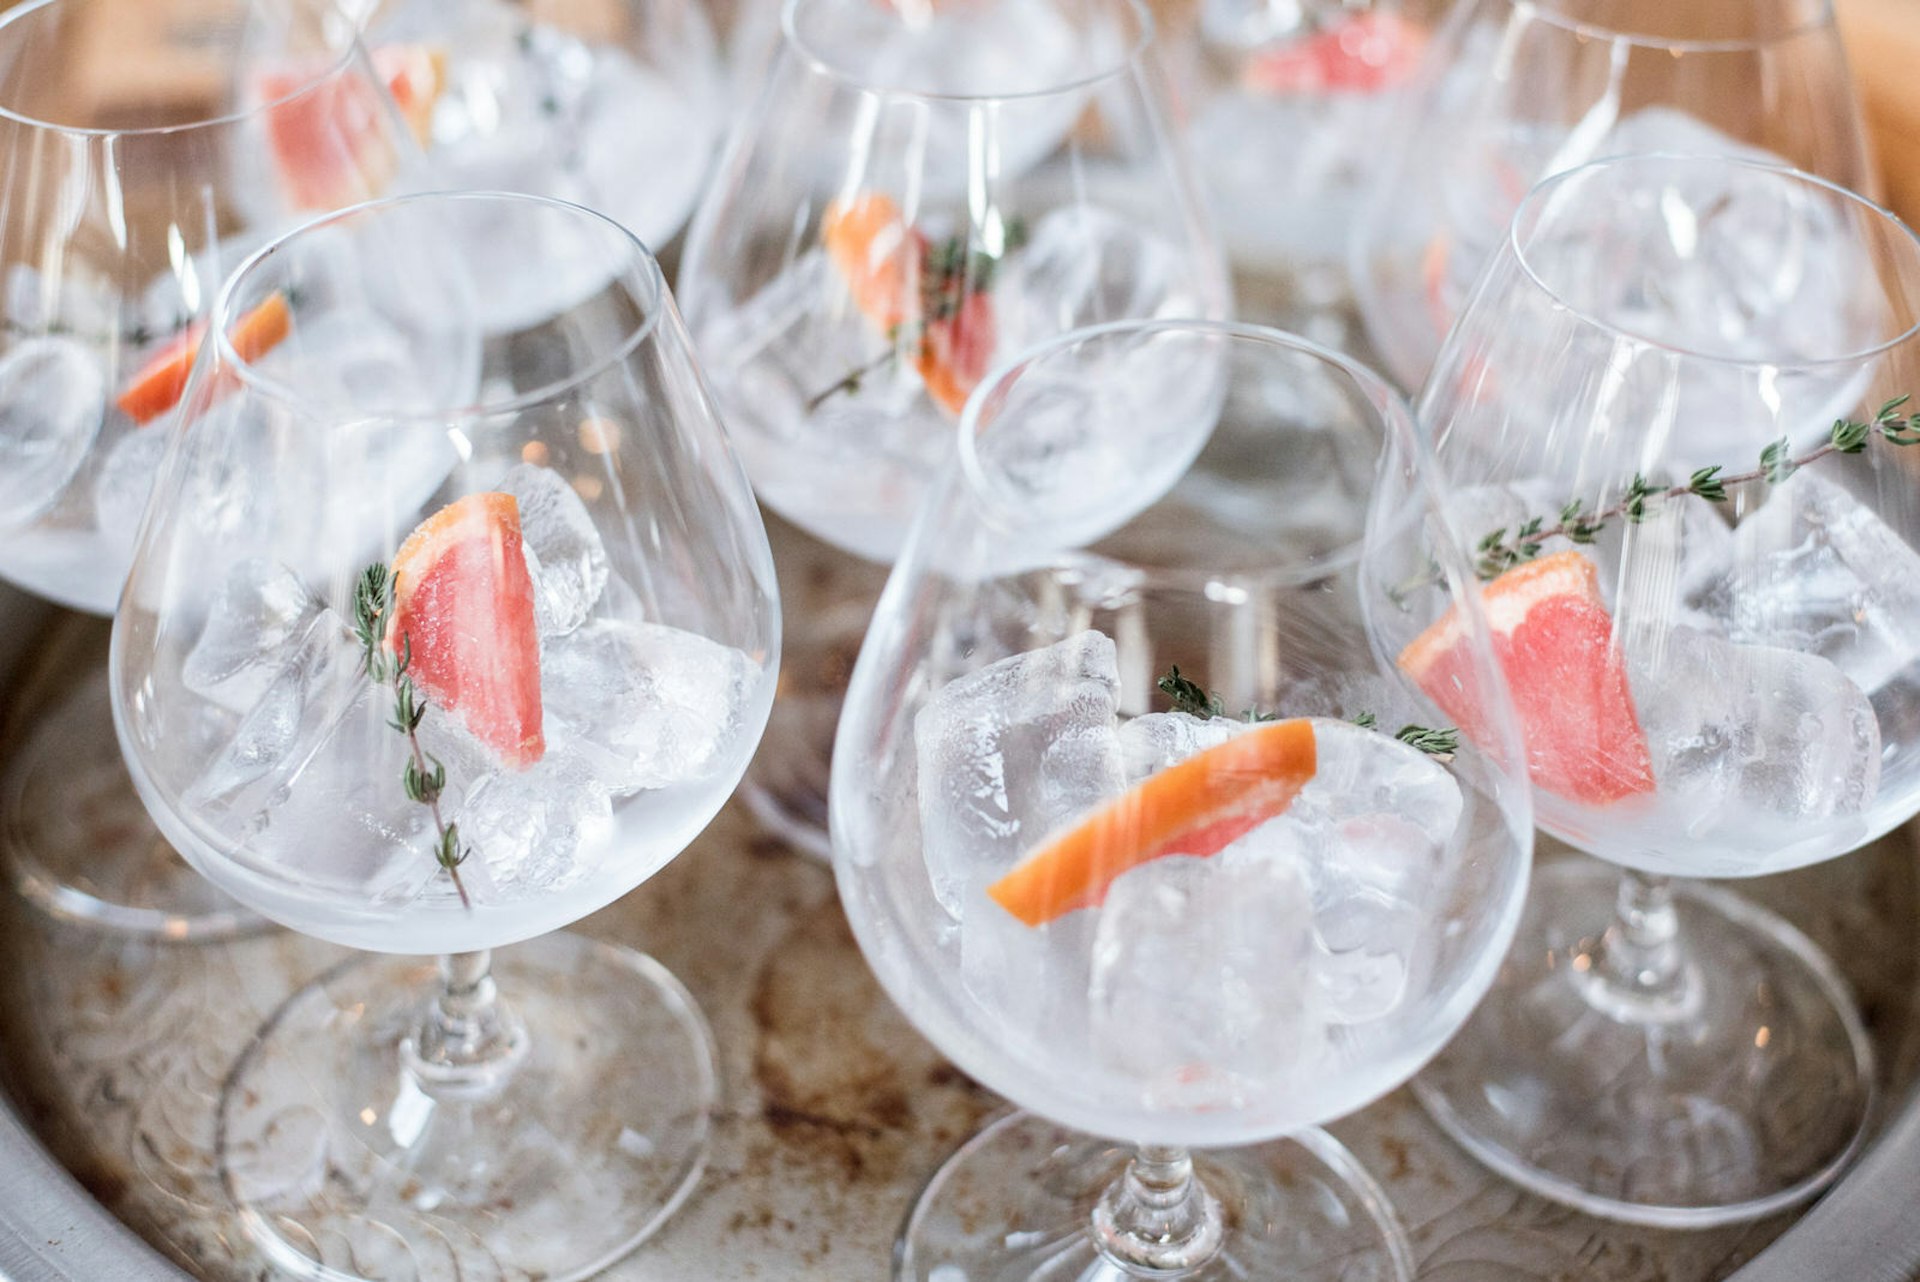 Cape Town gin - An aged silver tray filled with short wine-like glasses, each containing ice, a sprig of rosemary, a tiny wedge of pink grapefruit and gin